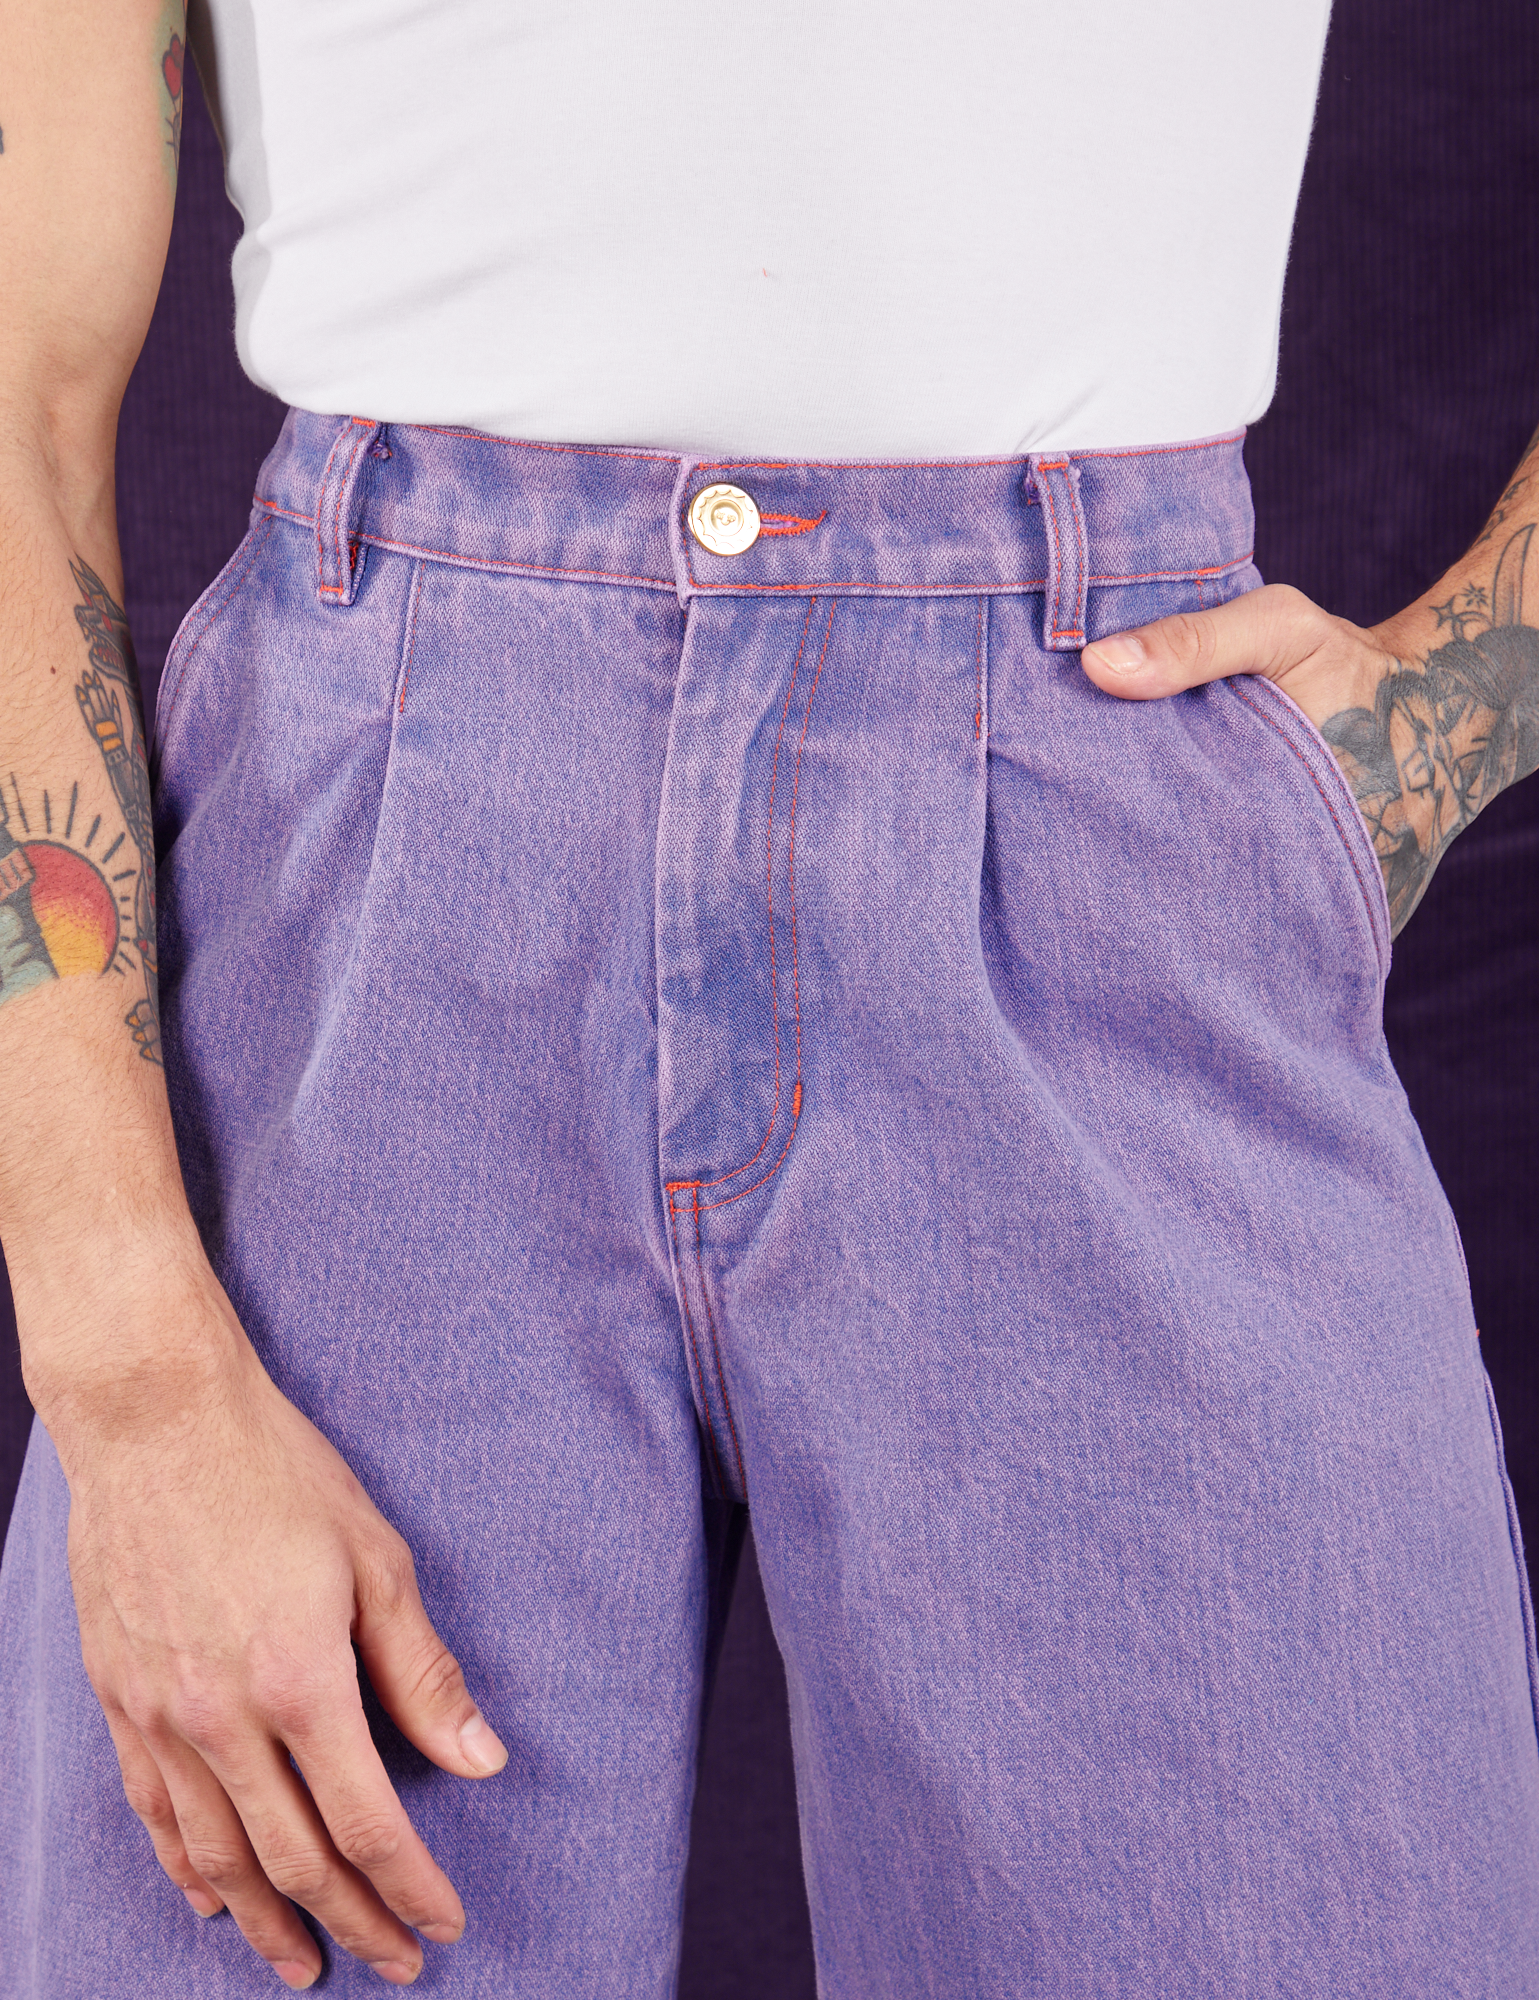 Overdyed Wide Leg Trousers in Faded Grape front close up on Jesse. They have their hand in the pocket.